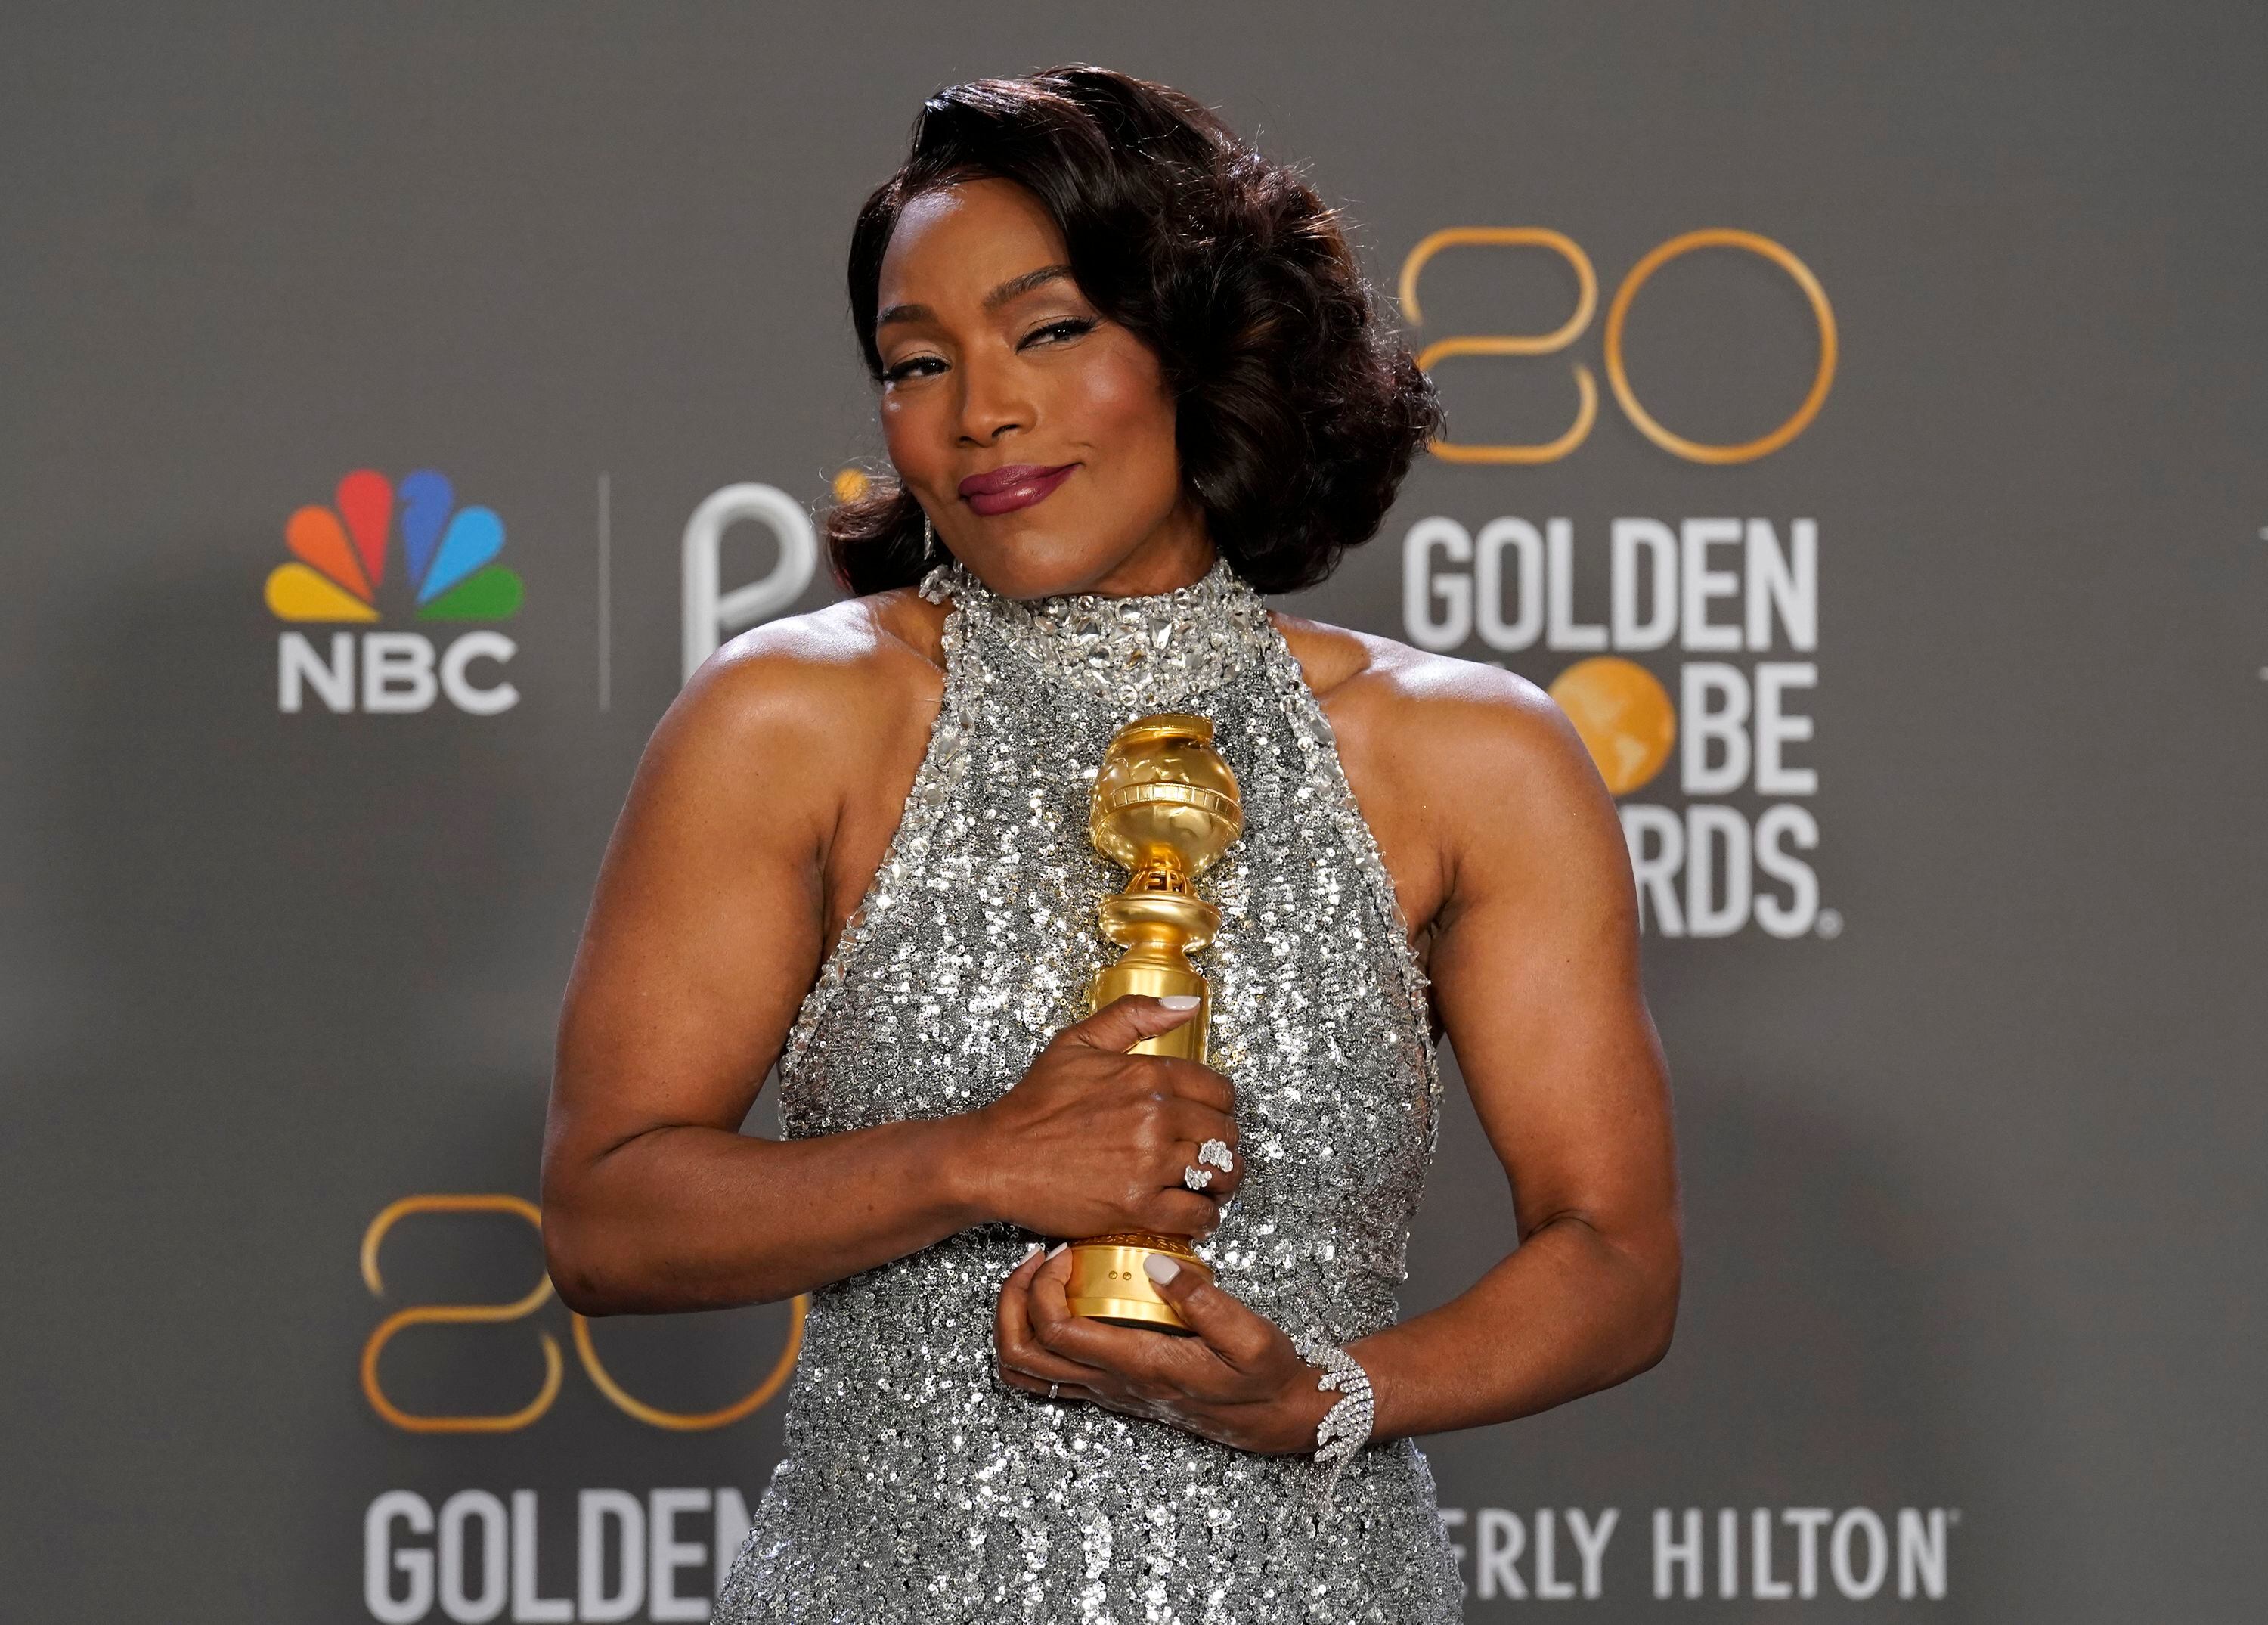 Golden Globes 2023 Live Updates: Banshees Of Inisherin And The Fabelmans Win Big